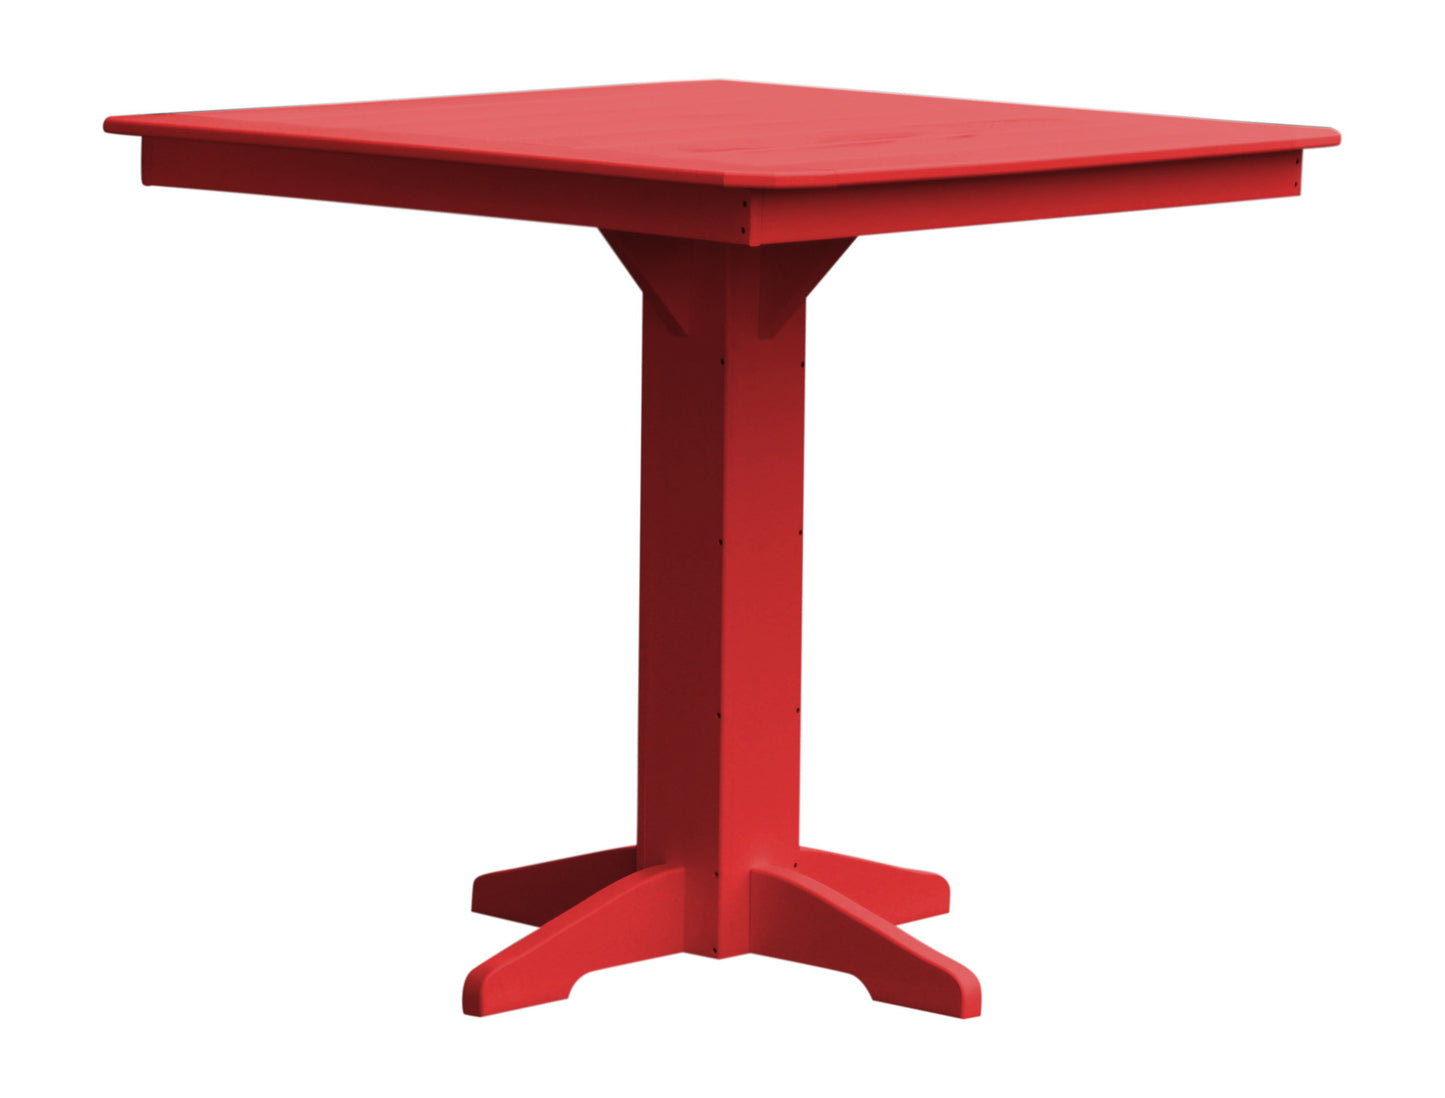 A&L Furniture Recycled Plastic 44" Square Bar Table - Bright Red